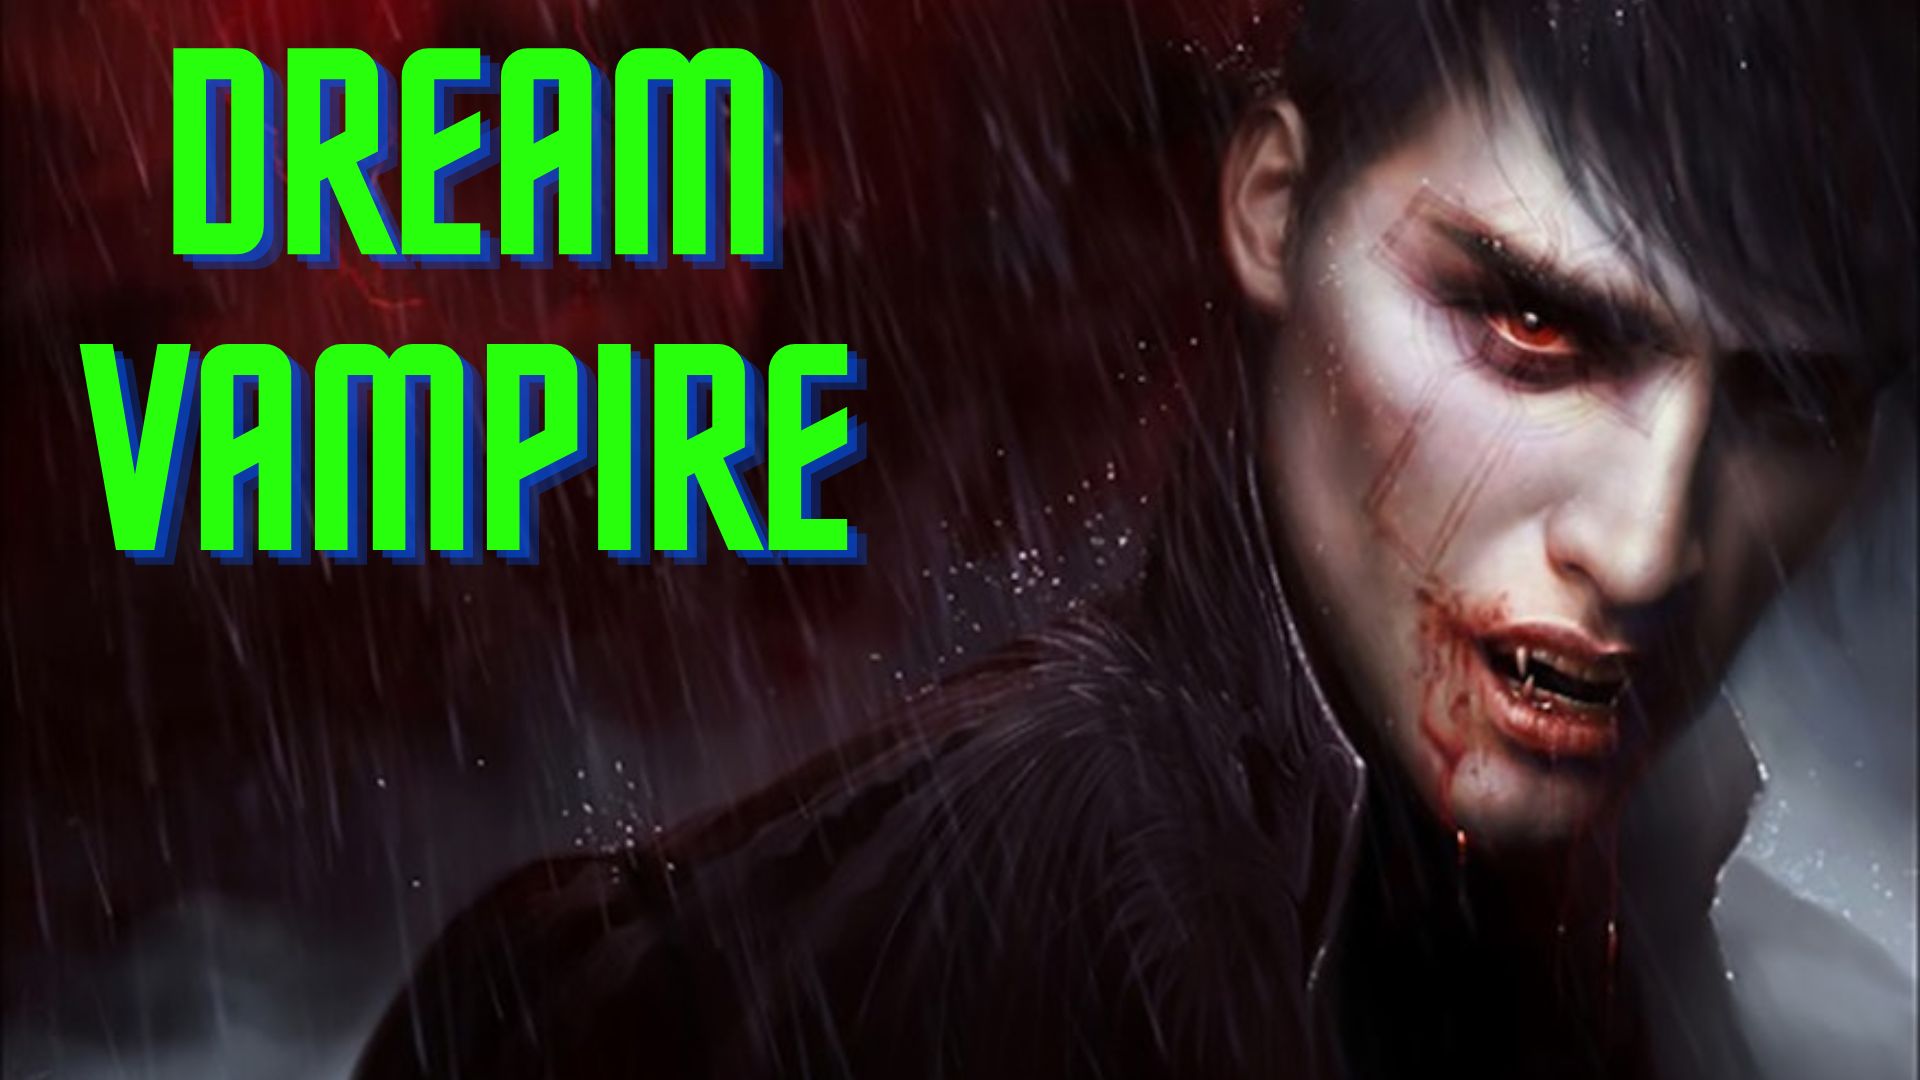 Dream Vampire - It Indicates Some Of Your Hidden Fears Or Desires